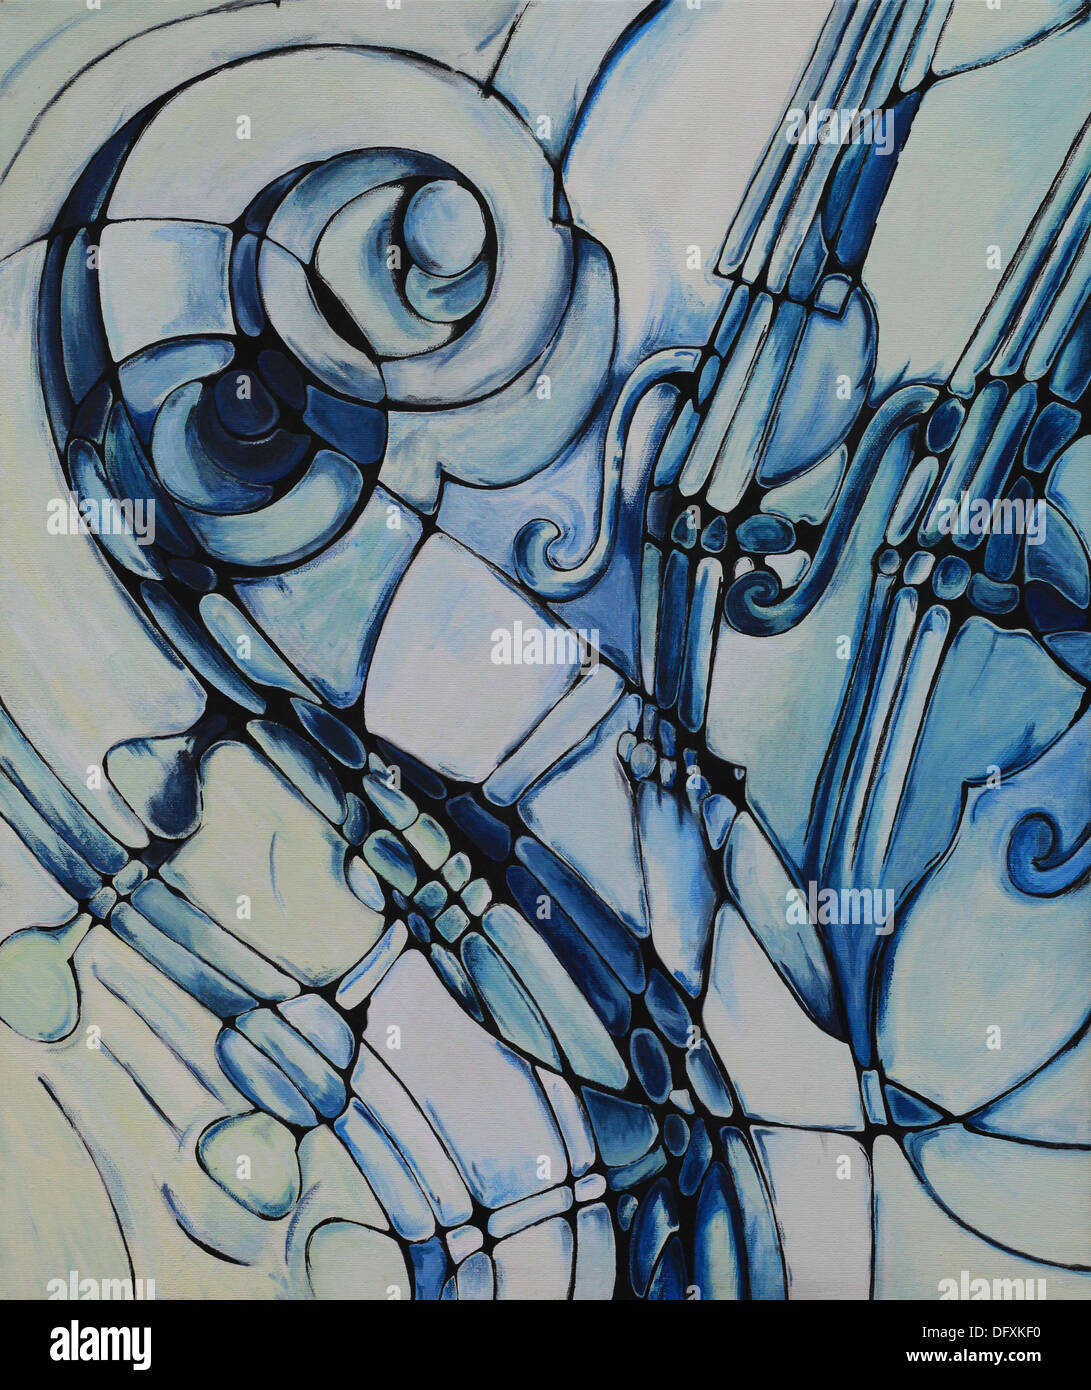 Abstract acrylic painting depicting string instruments like violoncellos or double basses. Stock Photo